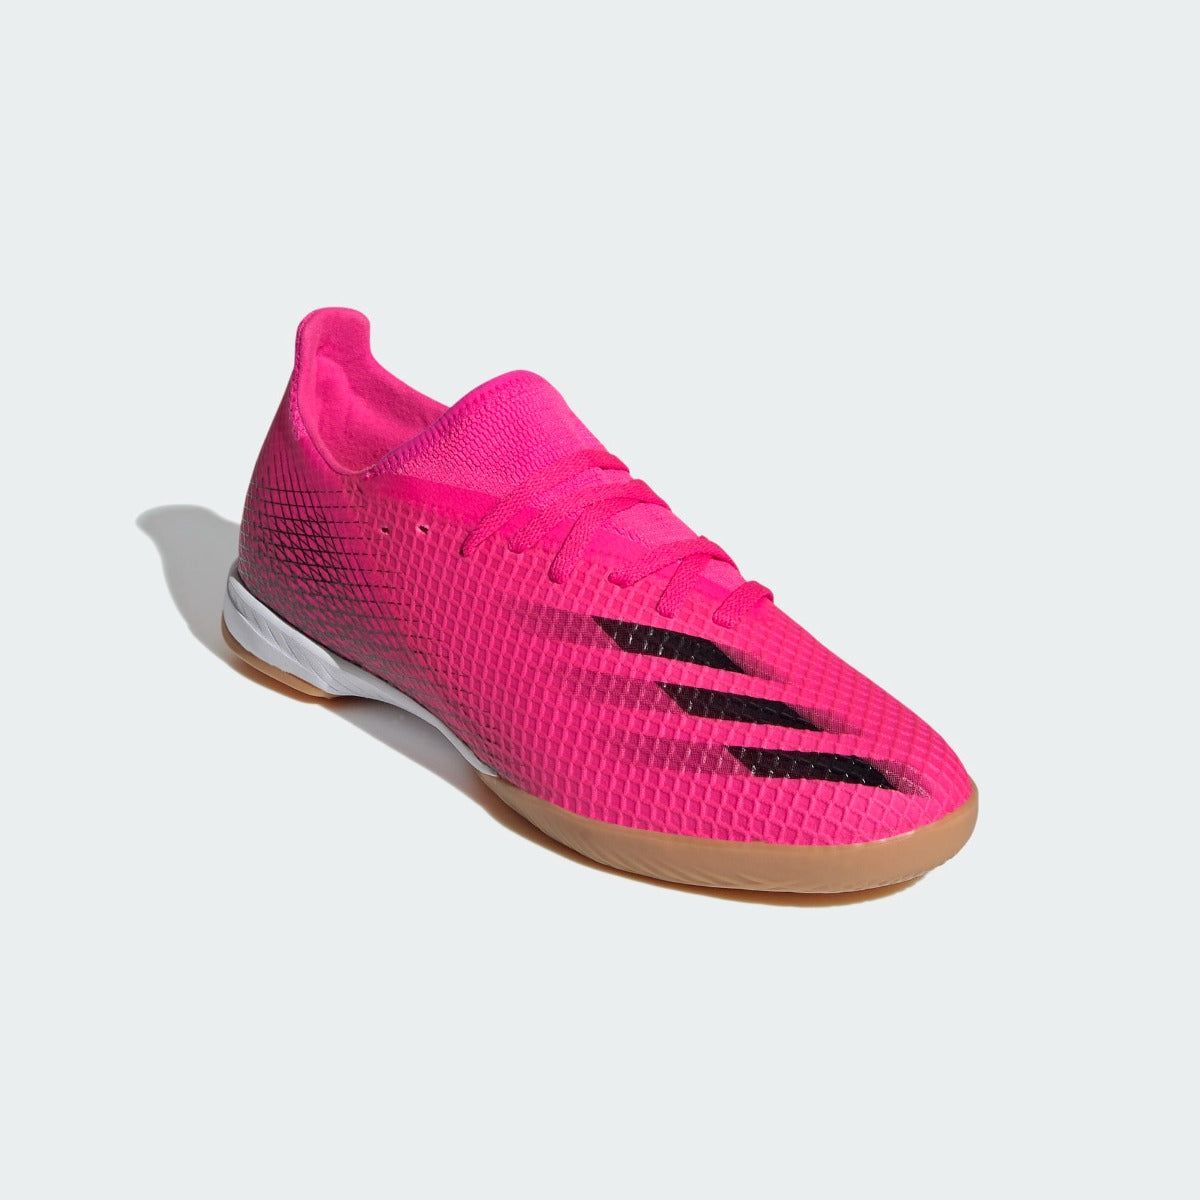 Adidas X Ghosted .3 IN - Pink-Black (Diagonal 1)